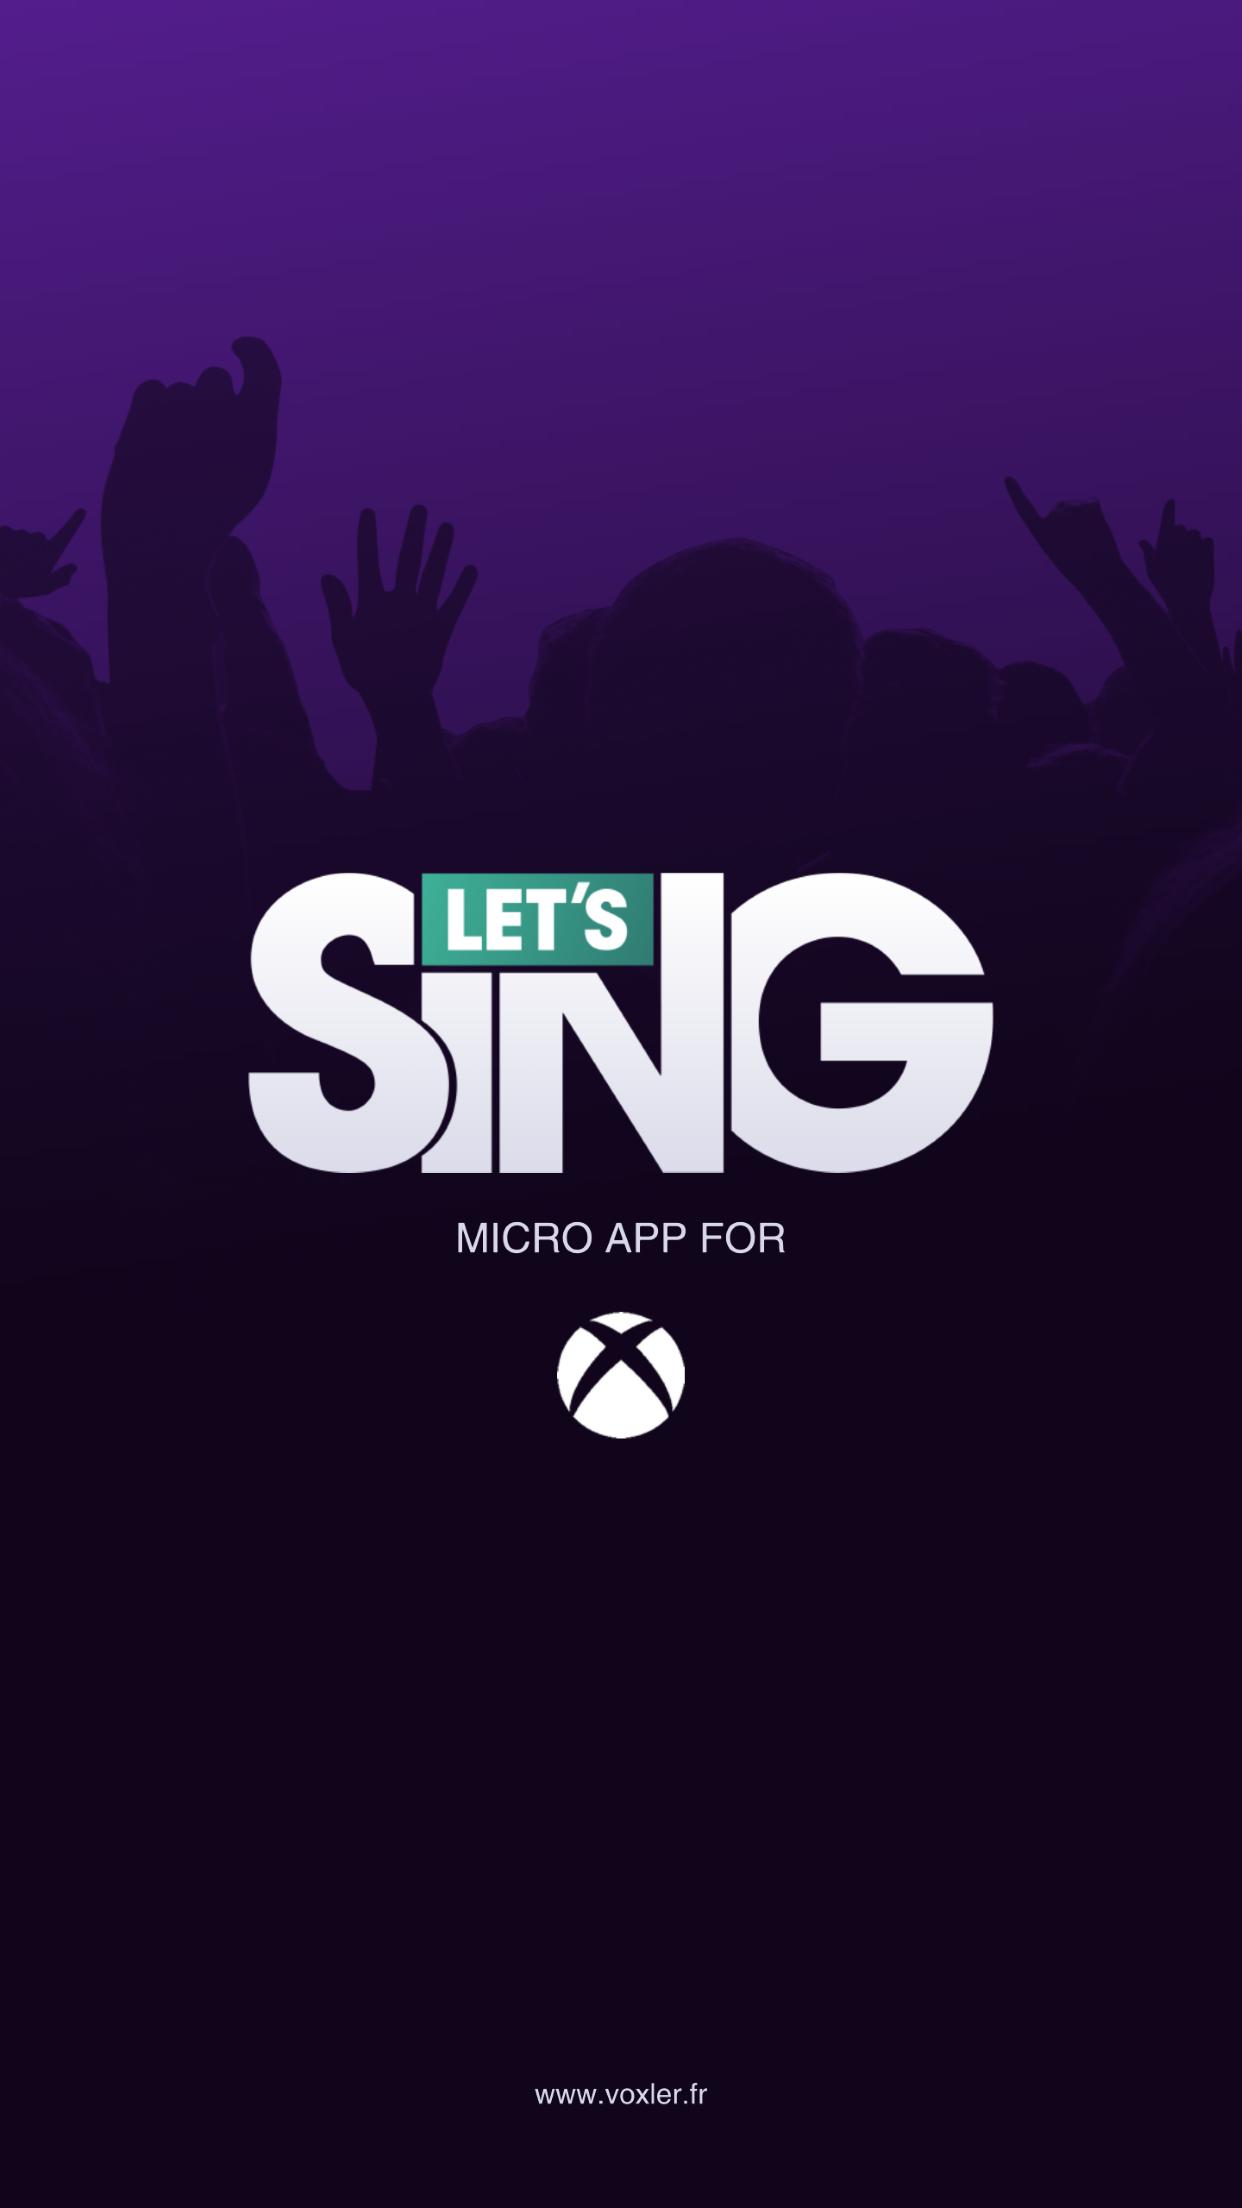 Let's Sing 2017 Microphone Xbox One for Android - APK Download